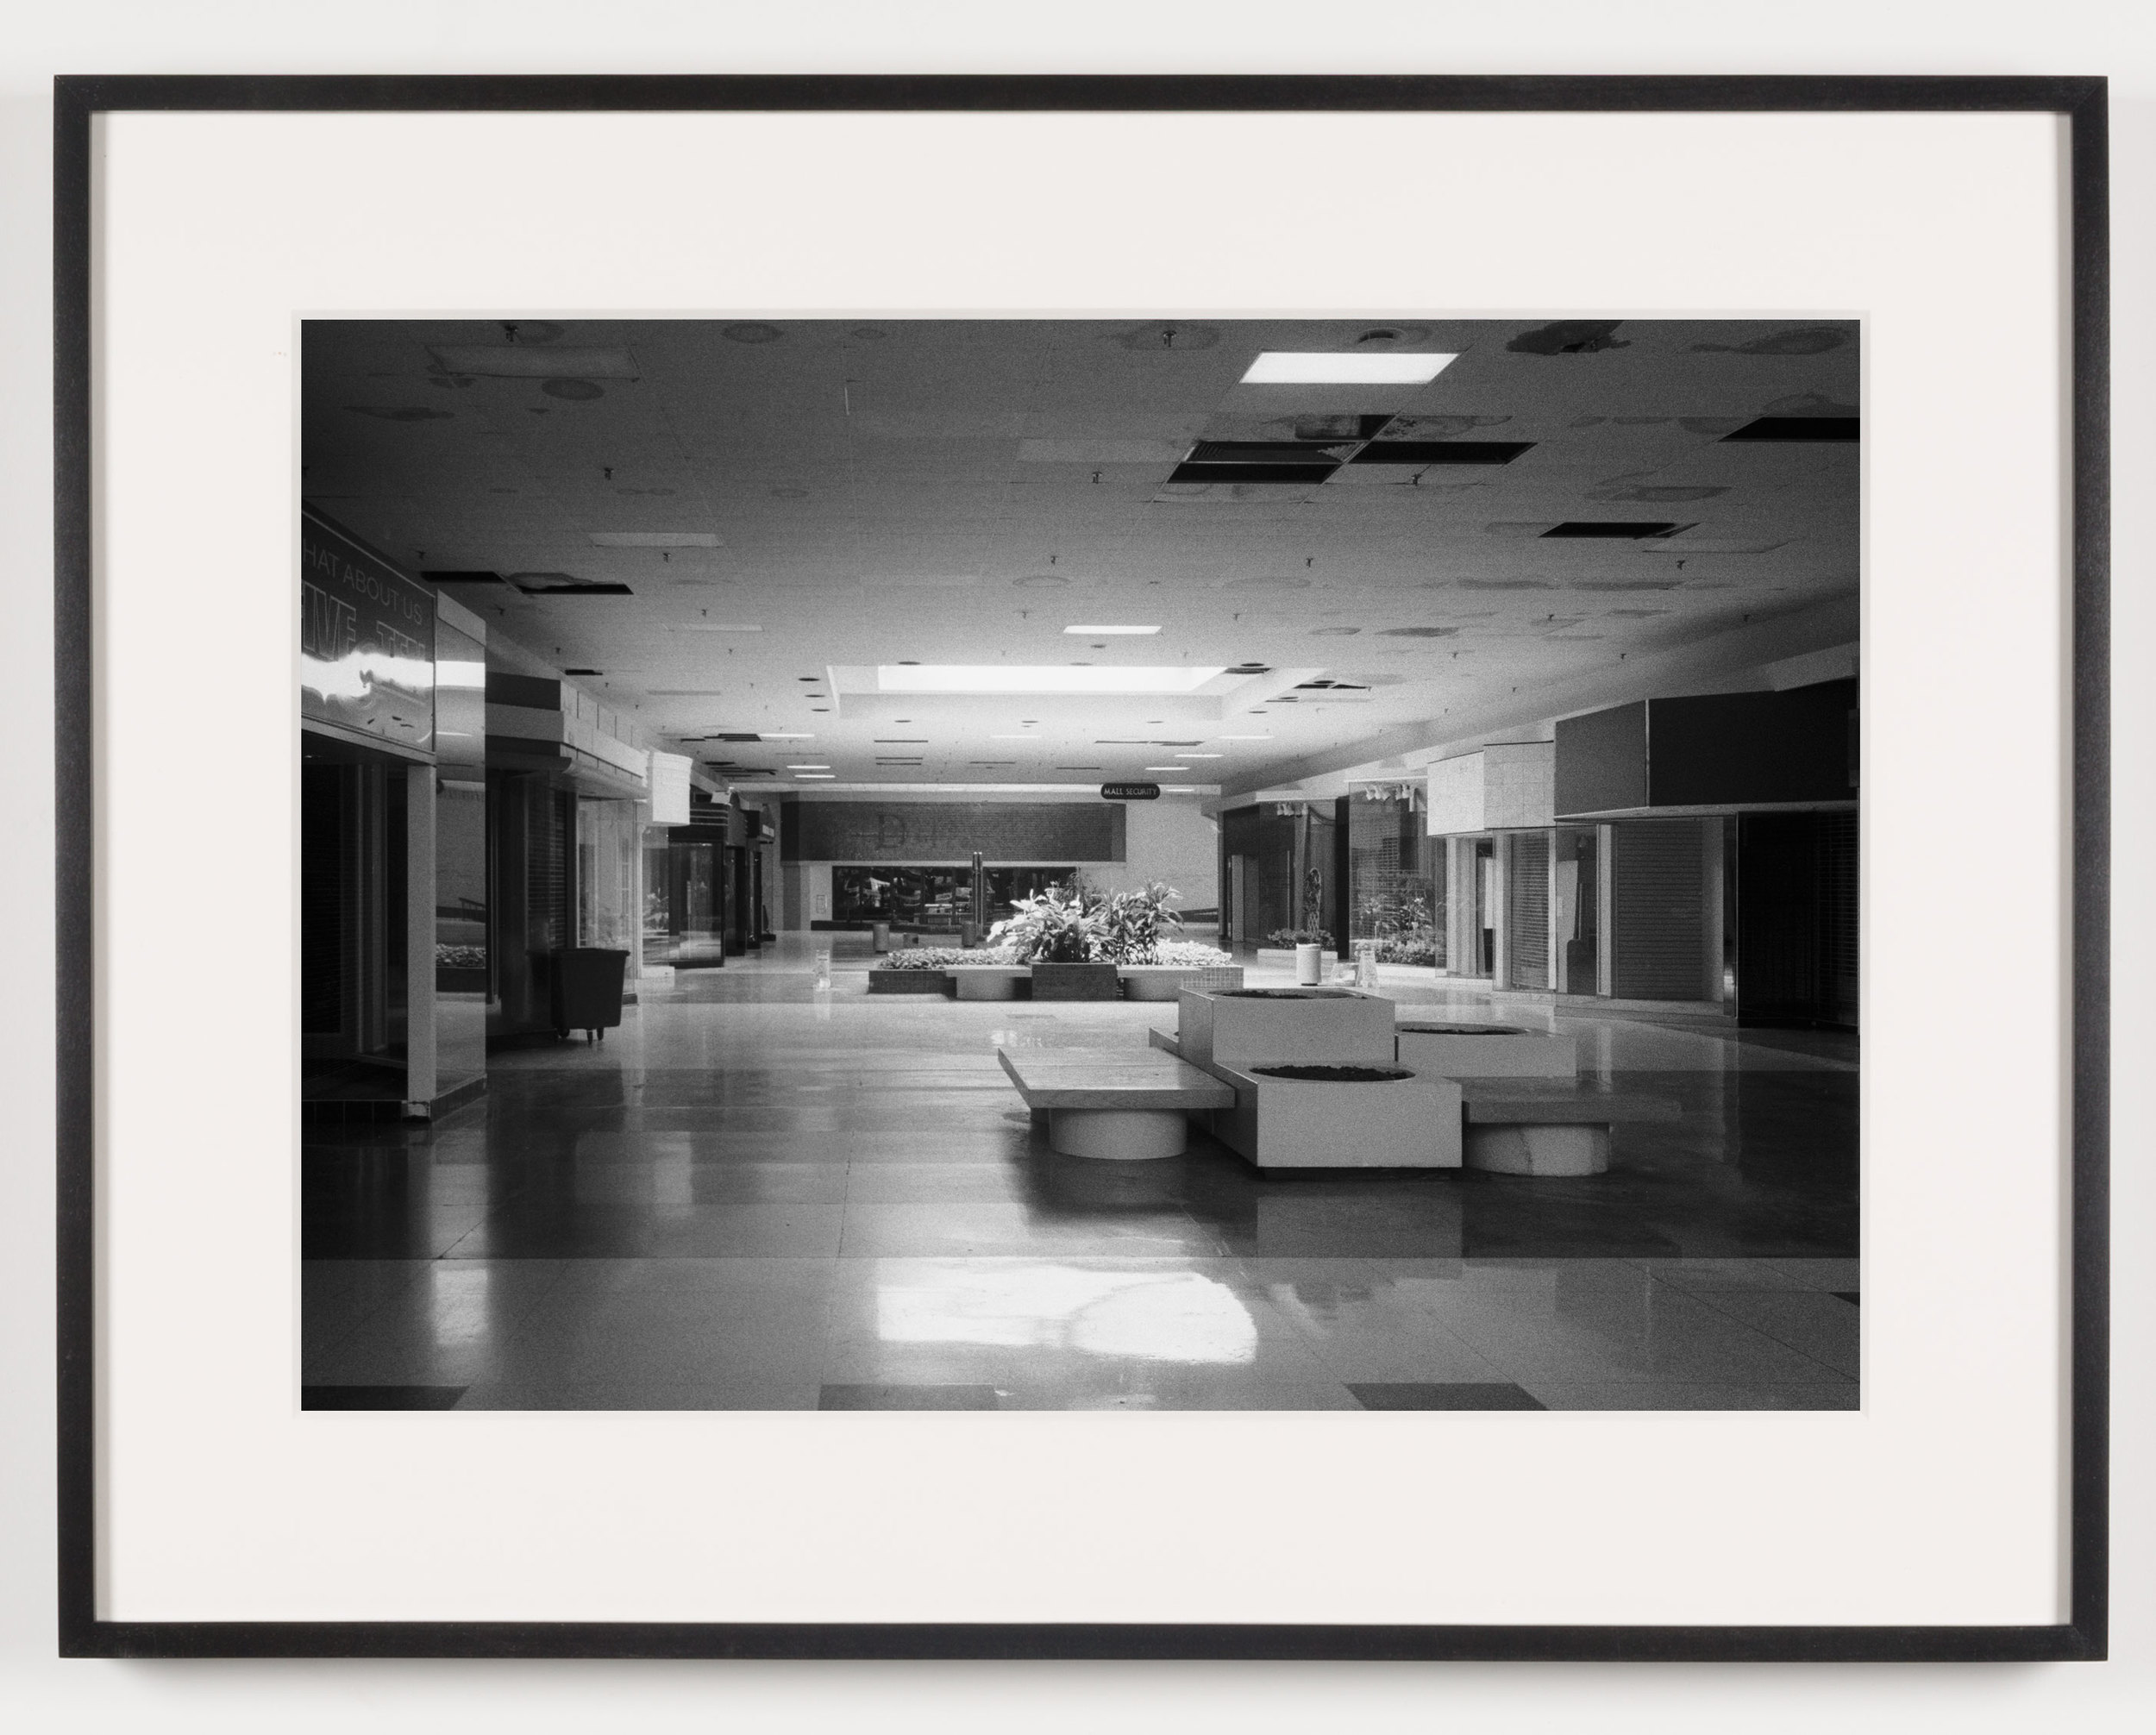   Rolling Acres Mall ('Dillards') Akron, OH, Est. 1975    2011   Epson Ultrachrome K3 archival ink jet print on Hahnemühle Photo Rag paper  21 5/8 x 28 1/8 inches   American Passages, 2001–2011     